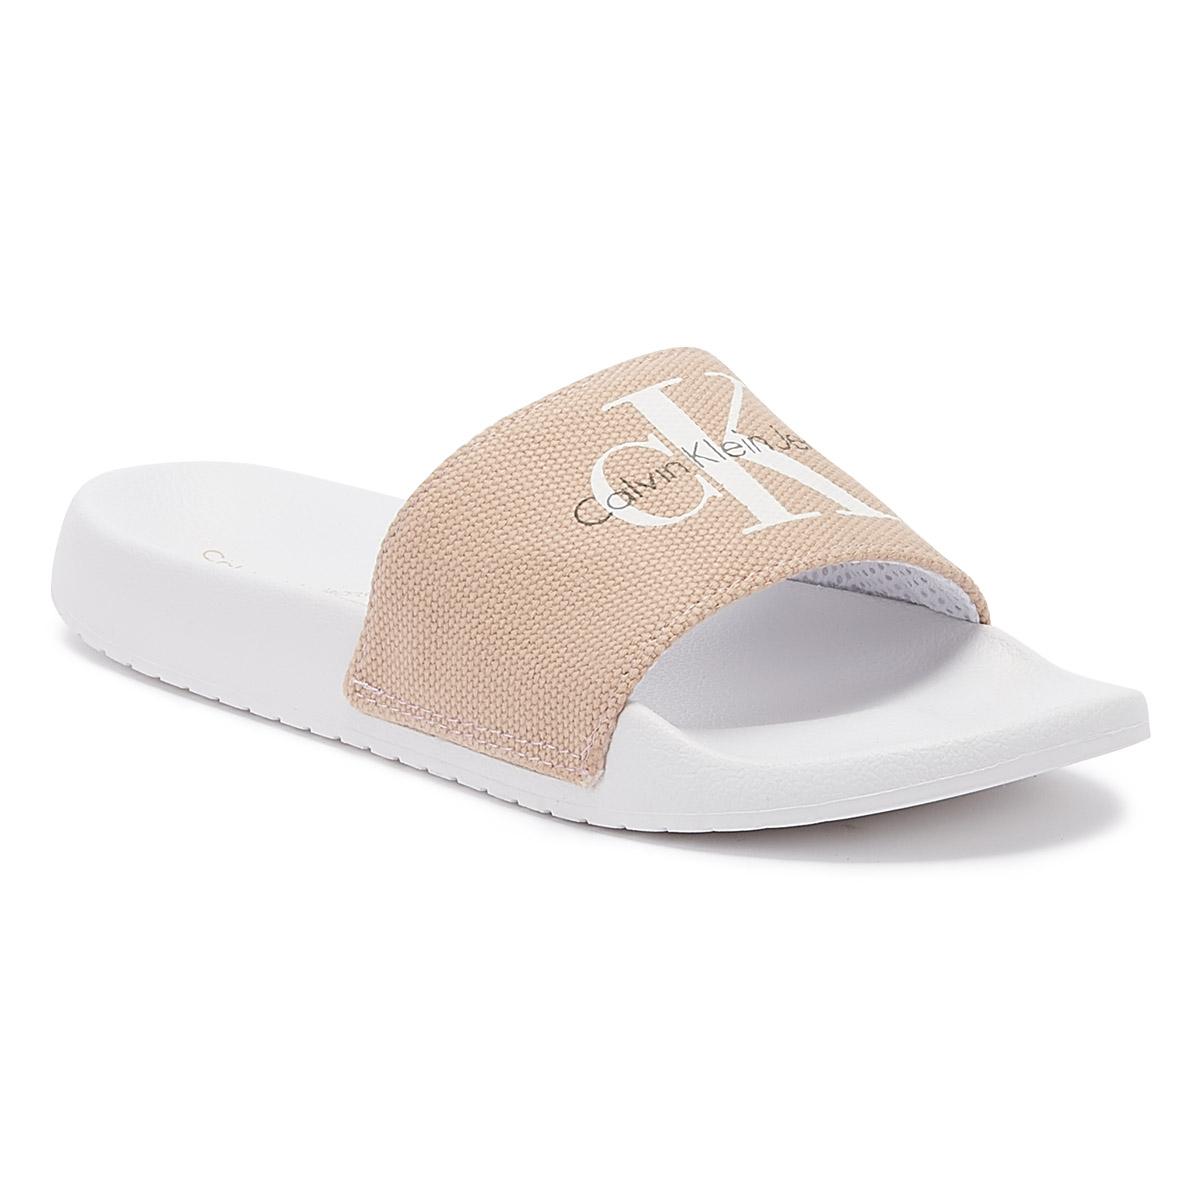 Pink Calvin Klein Sliders Clearance, SAVE 52%.